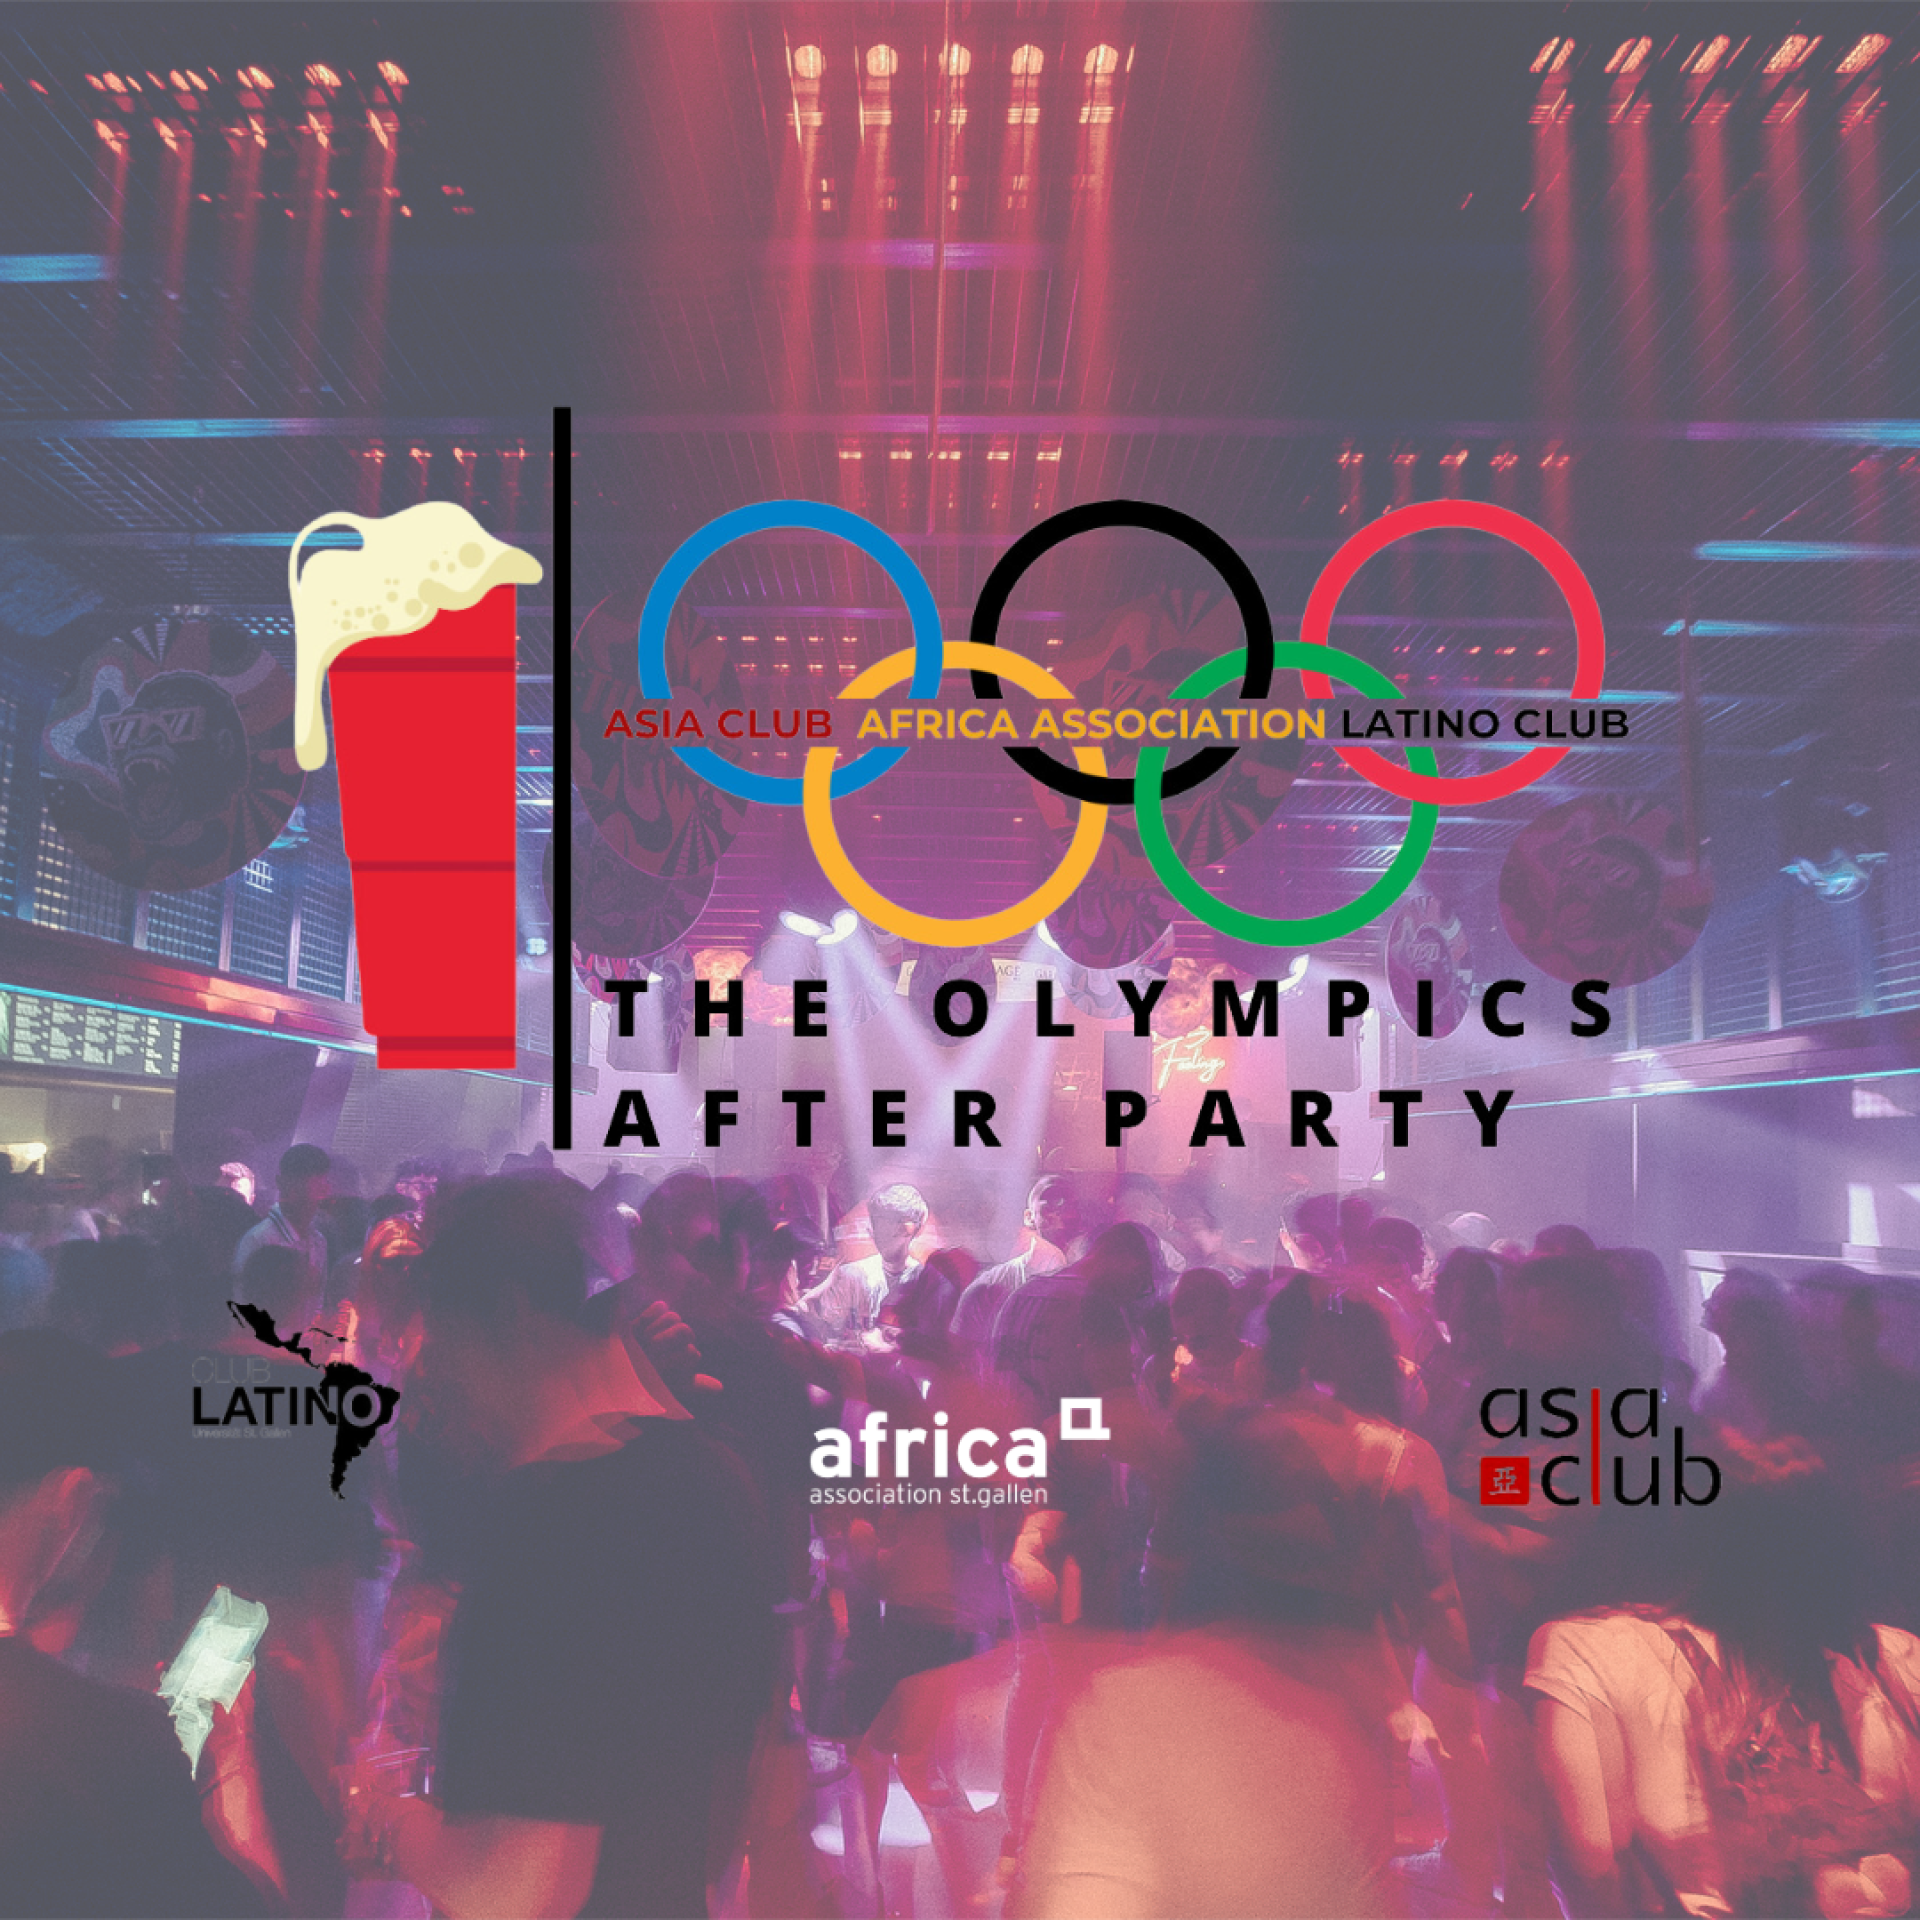 The olympics after party @ Garage